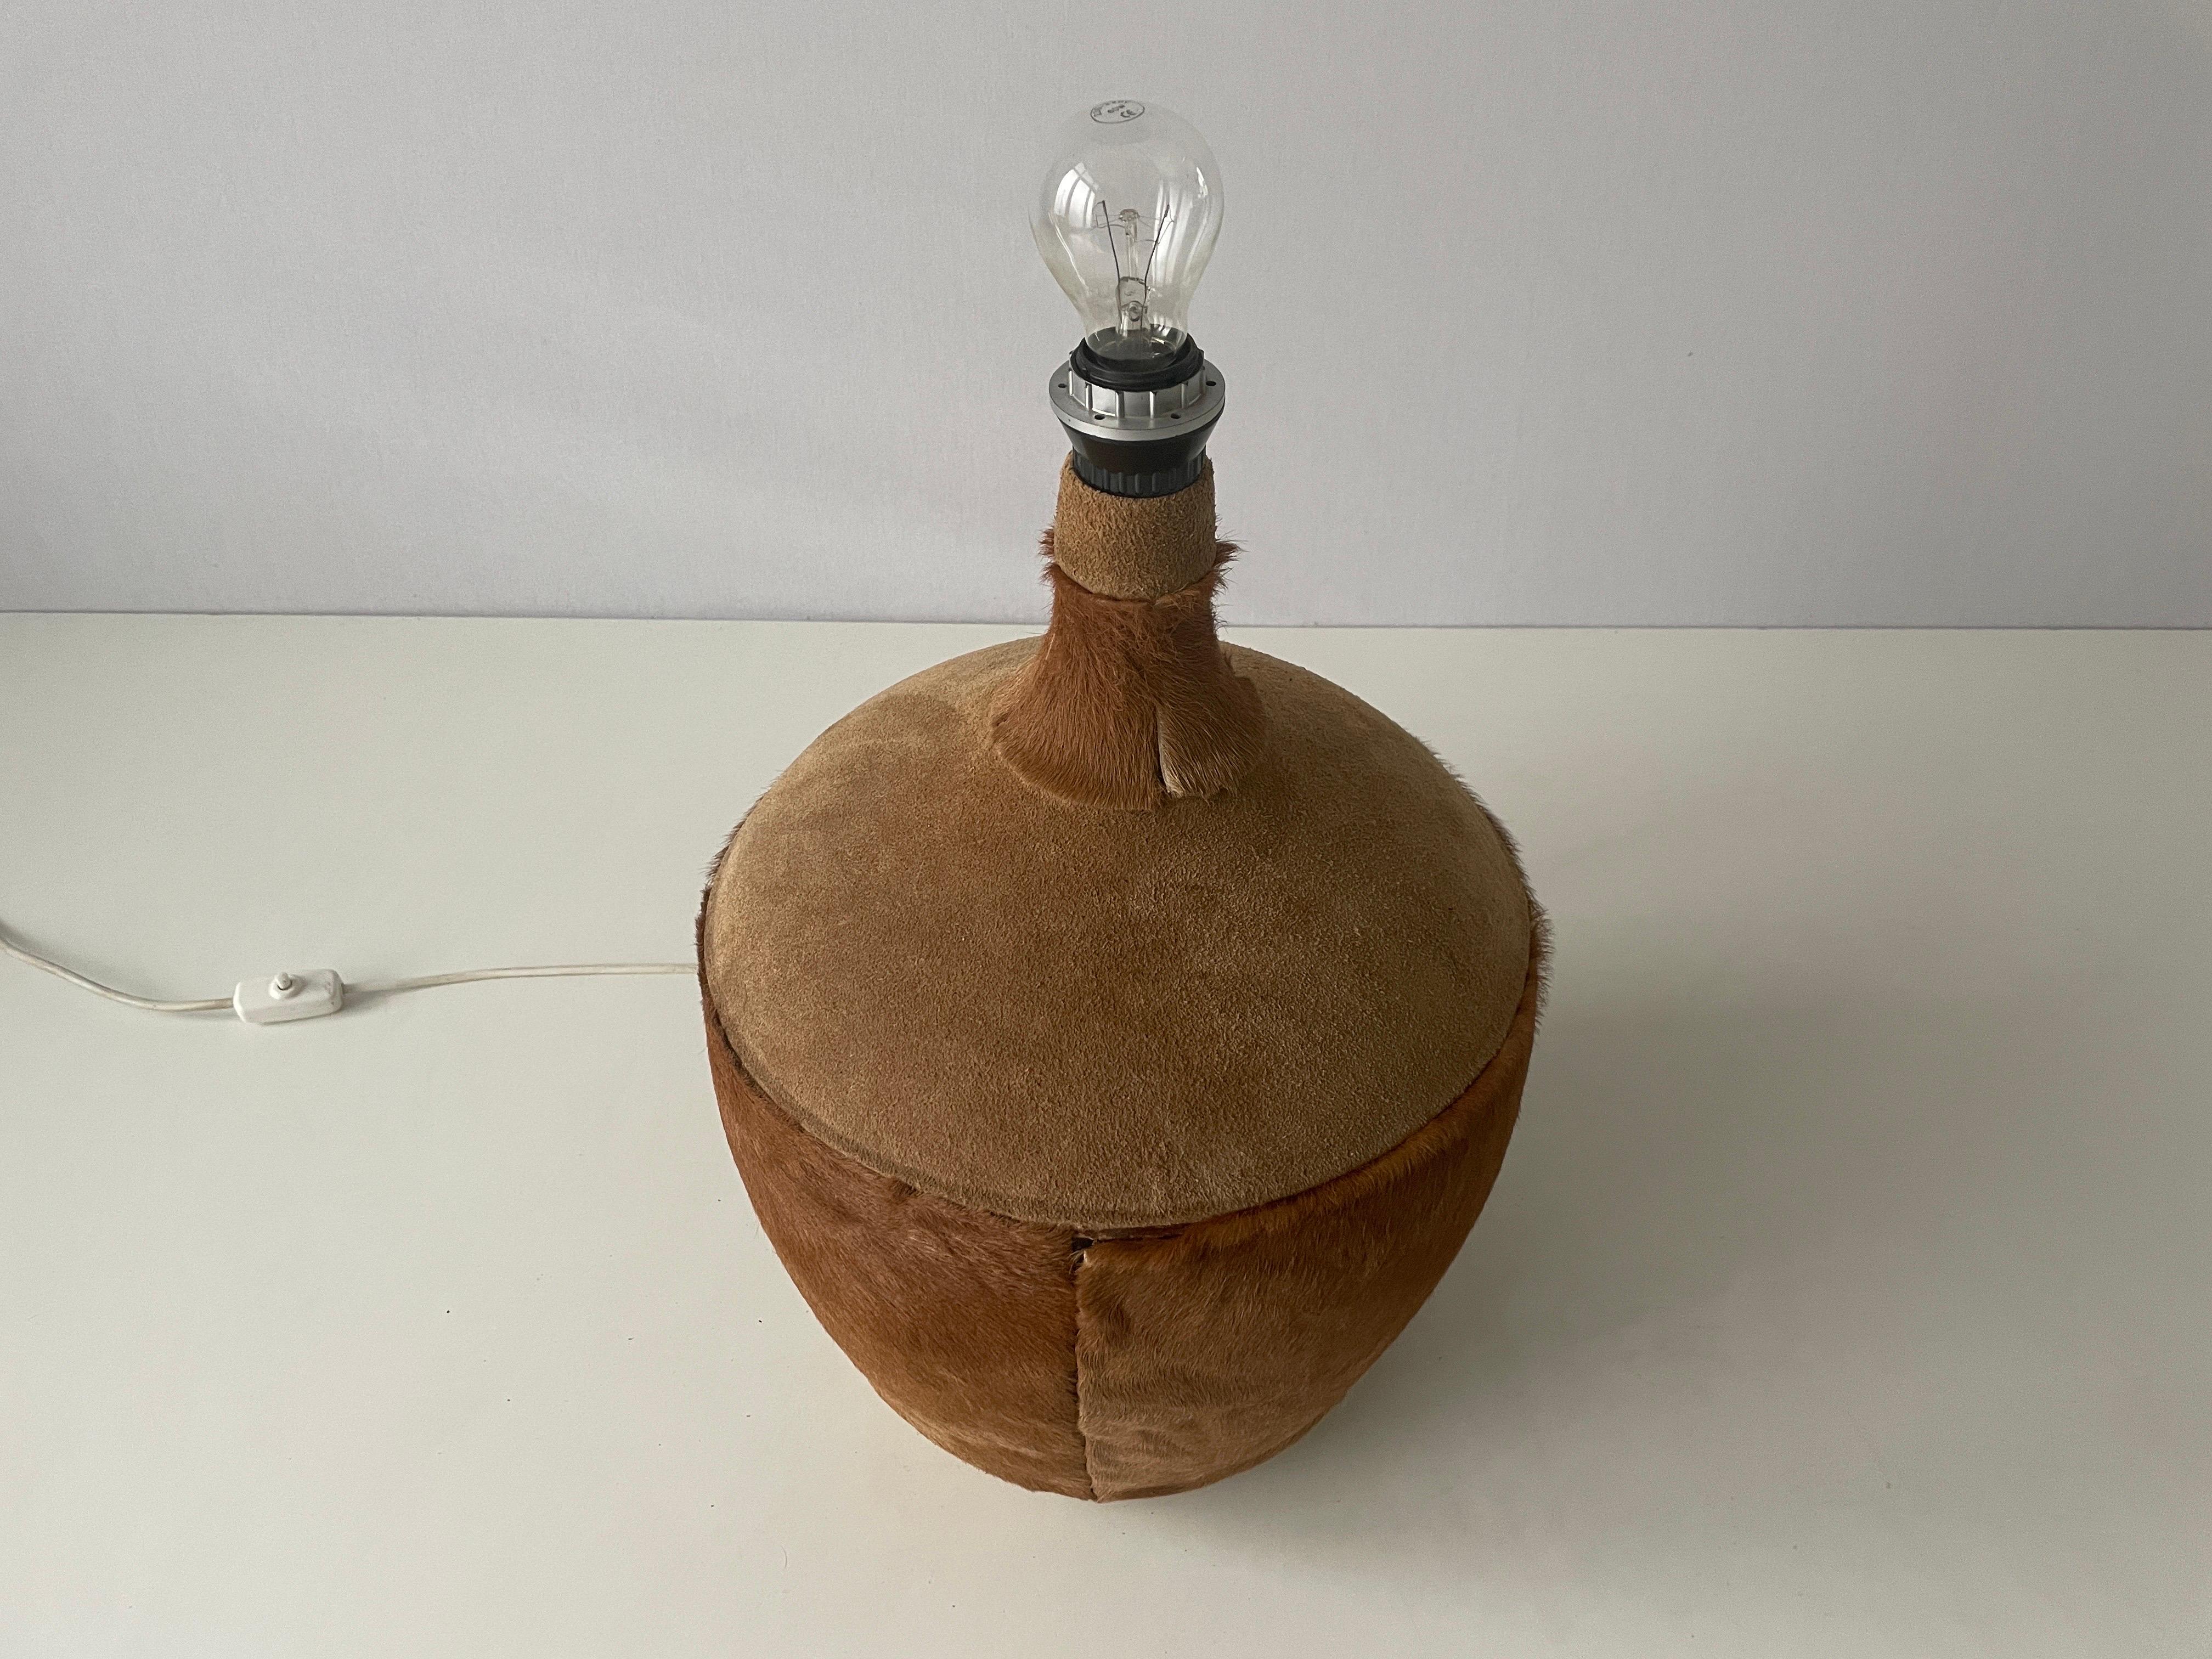 Tan Suede Leather and Glass Shade Floor or Table Lamp, 1960s, Denmark For Sale 4